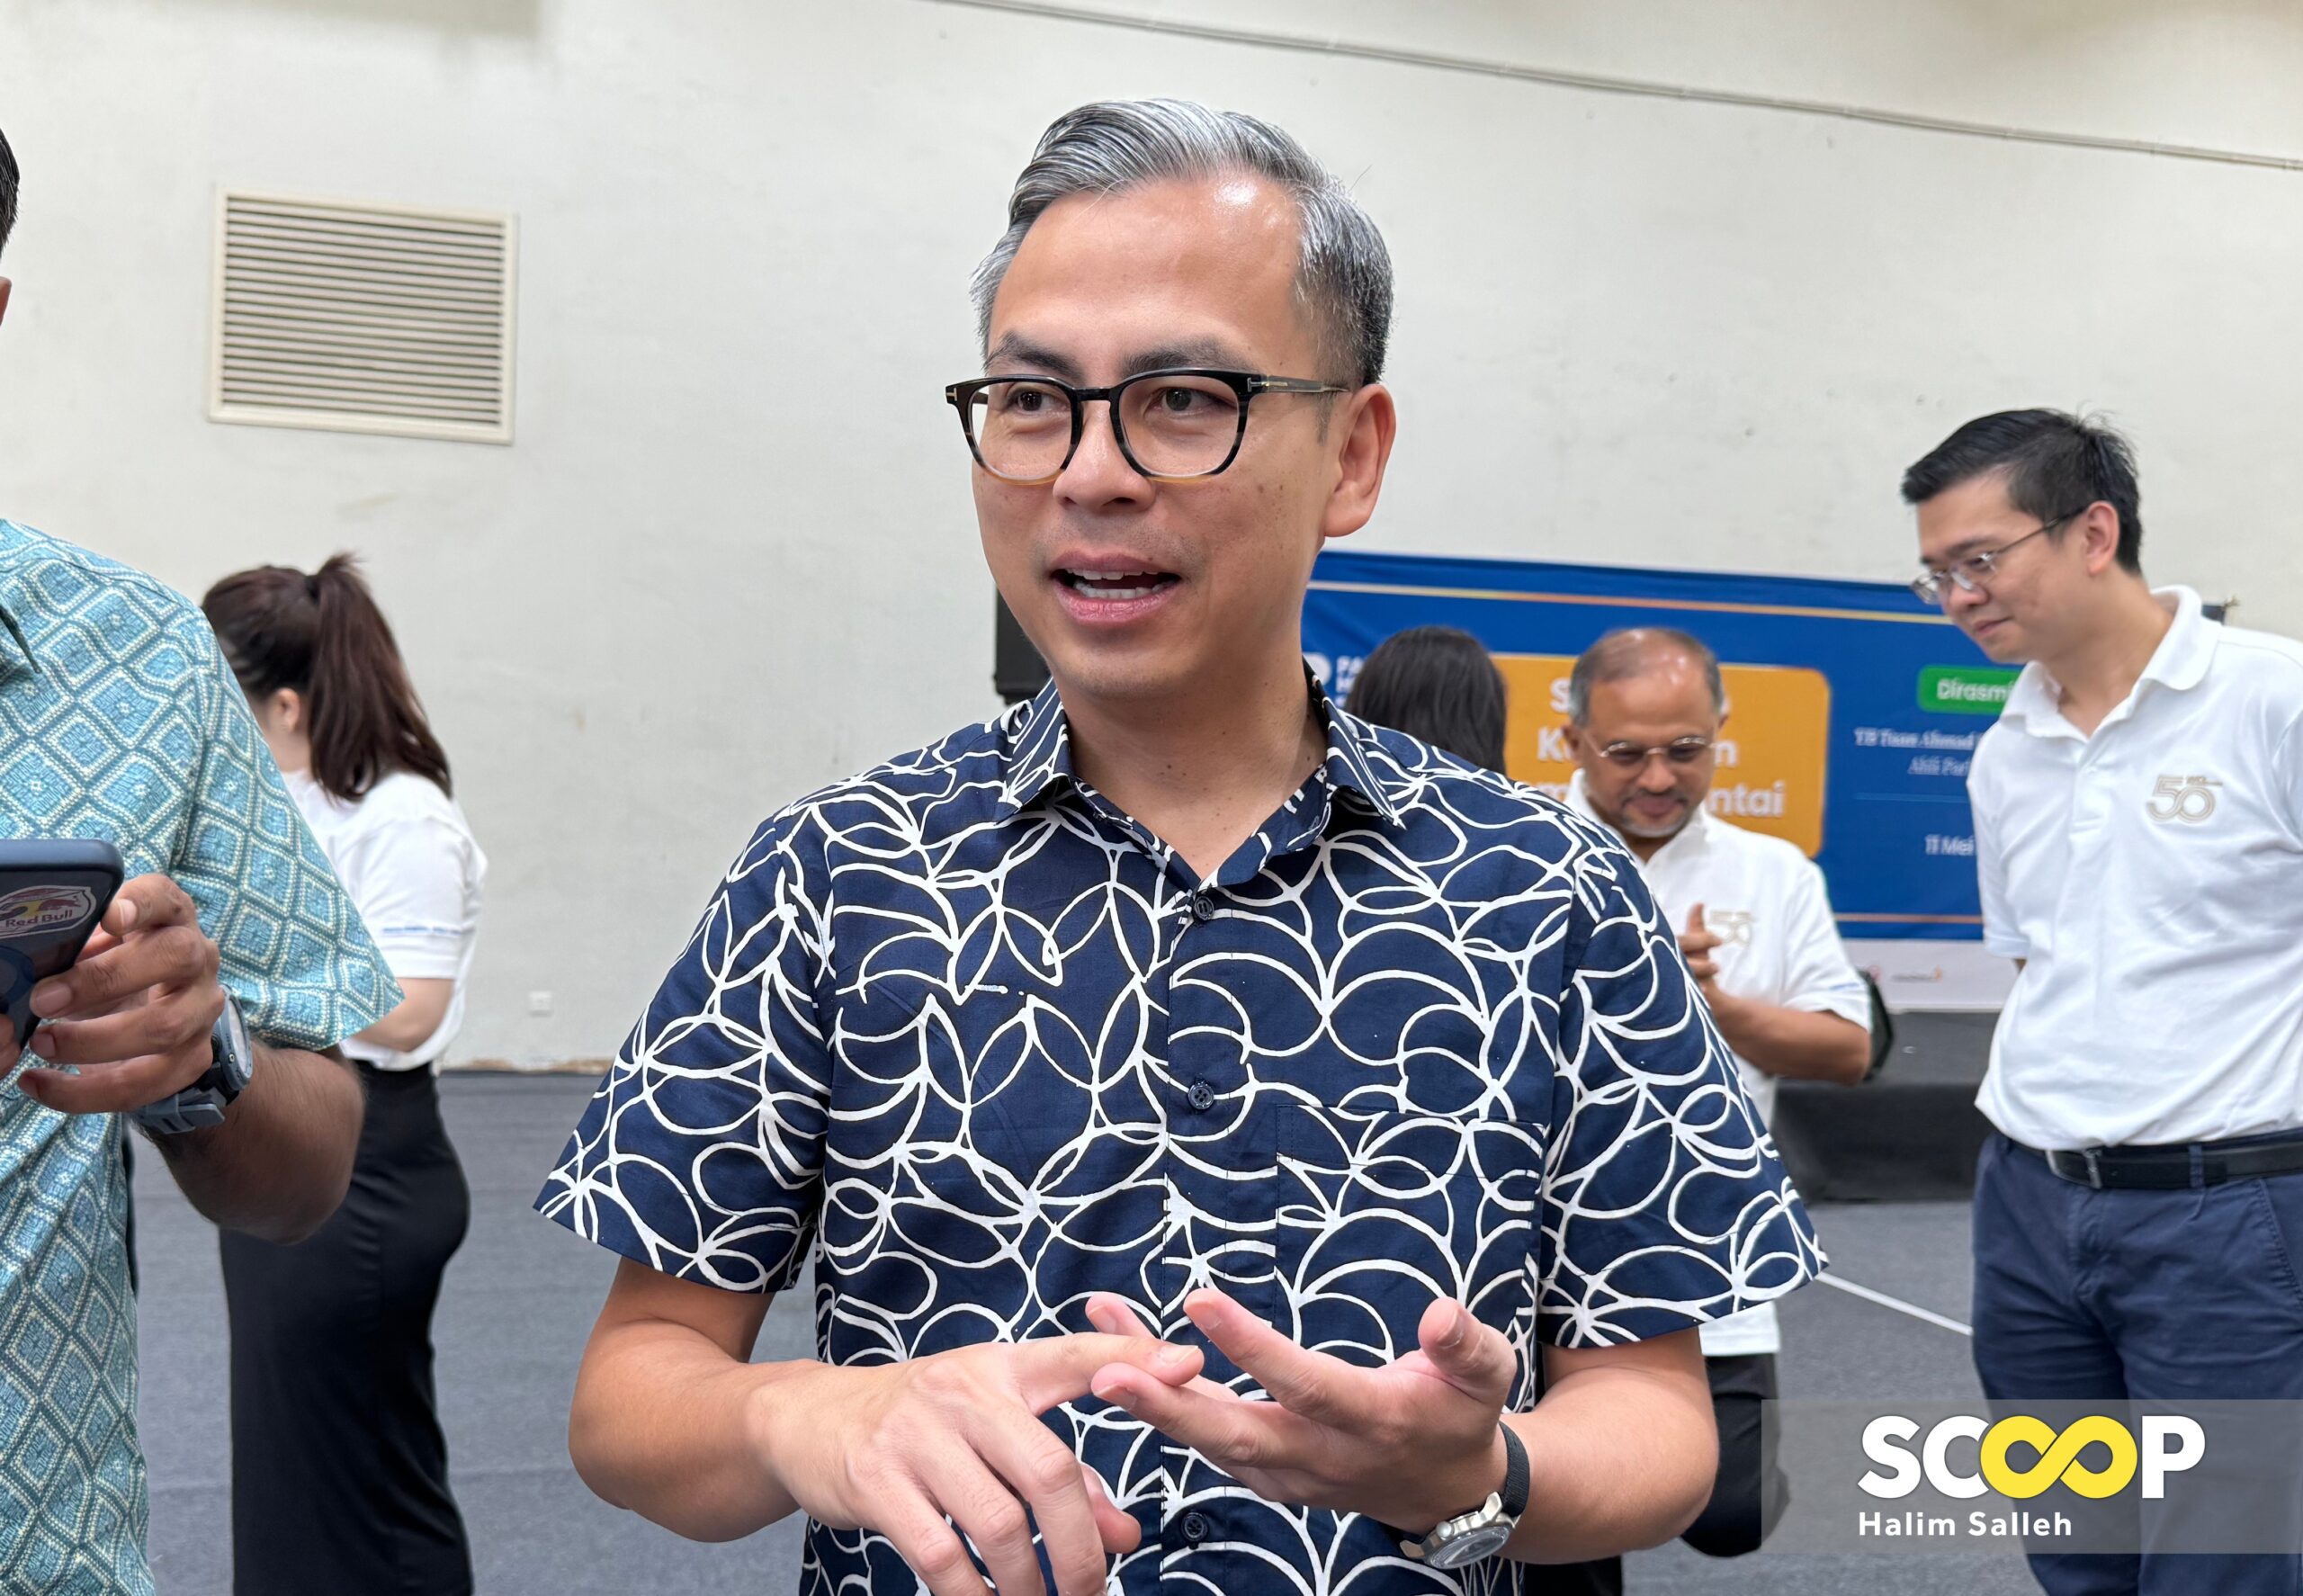 There’s no reward for playing up 3R sentiments, says Fahmi